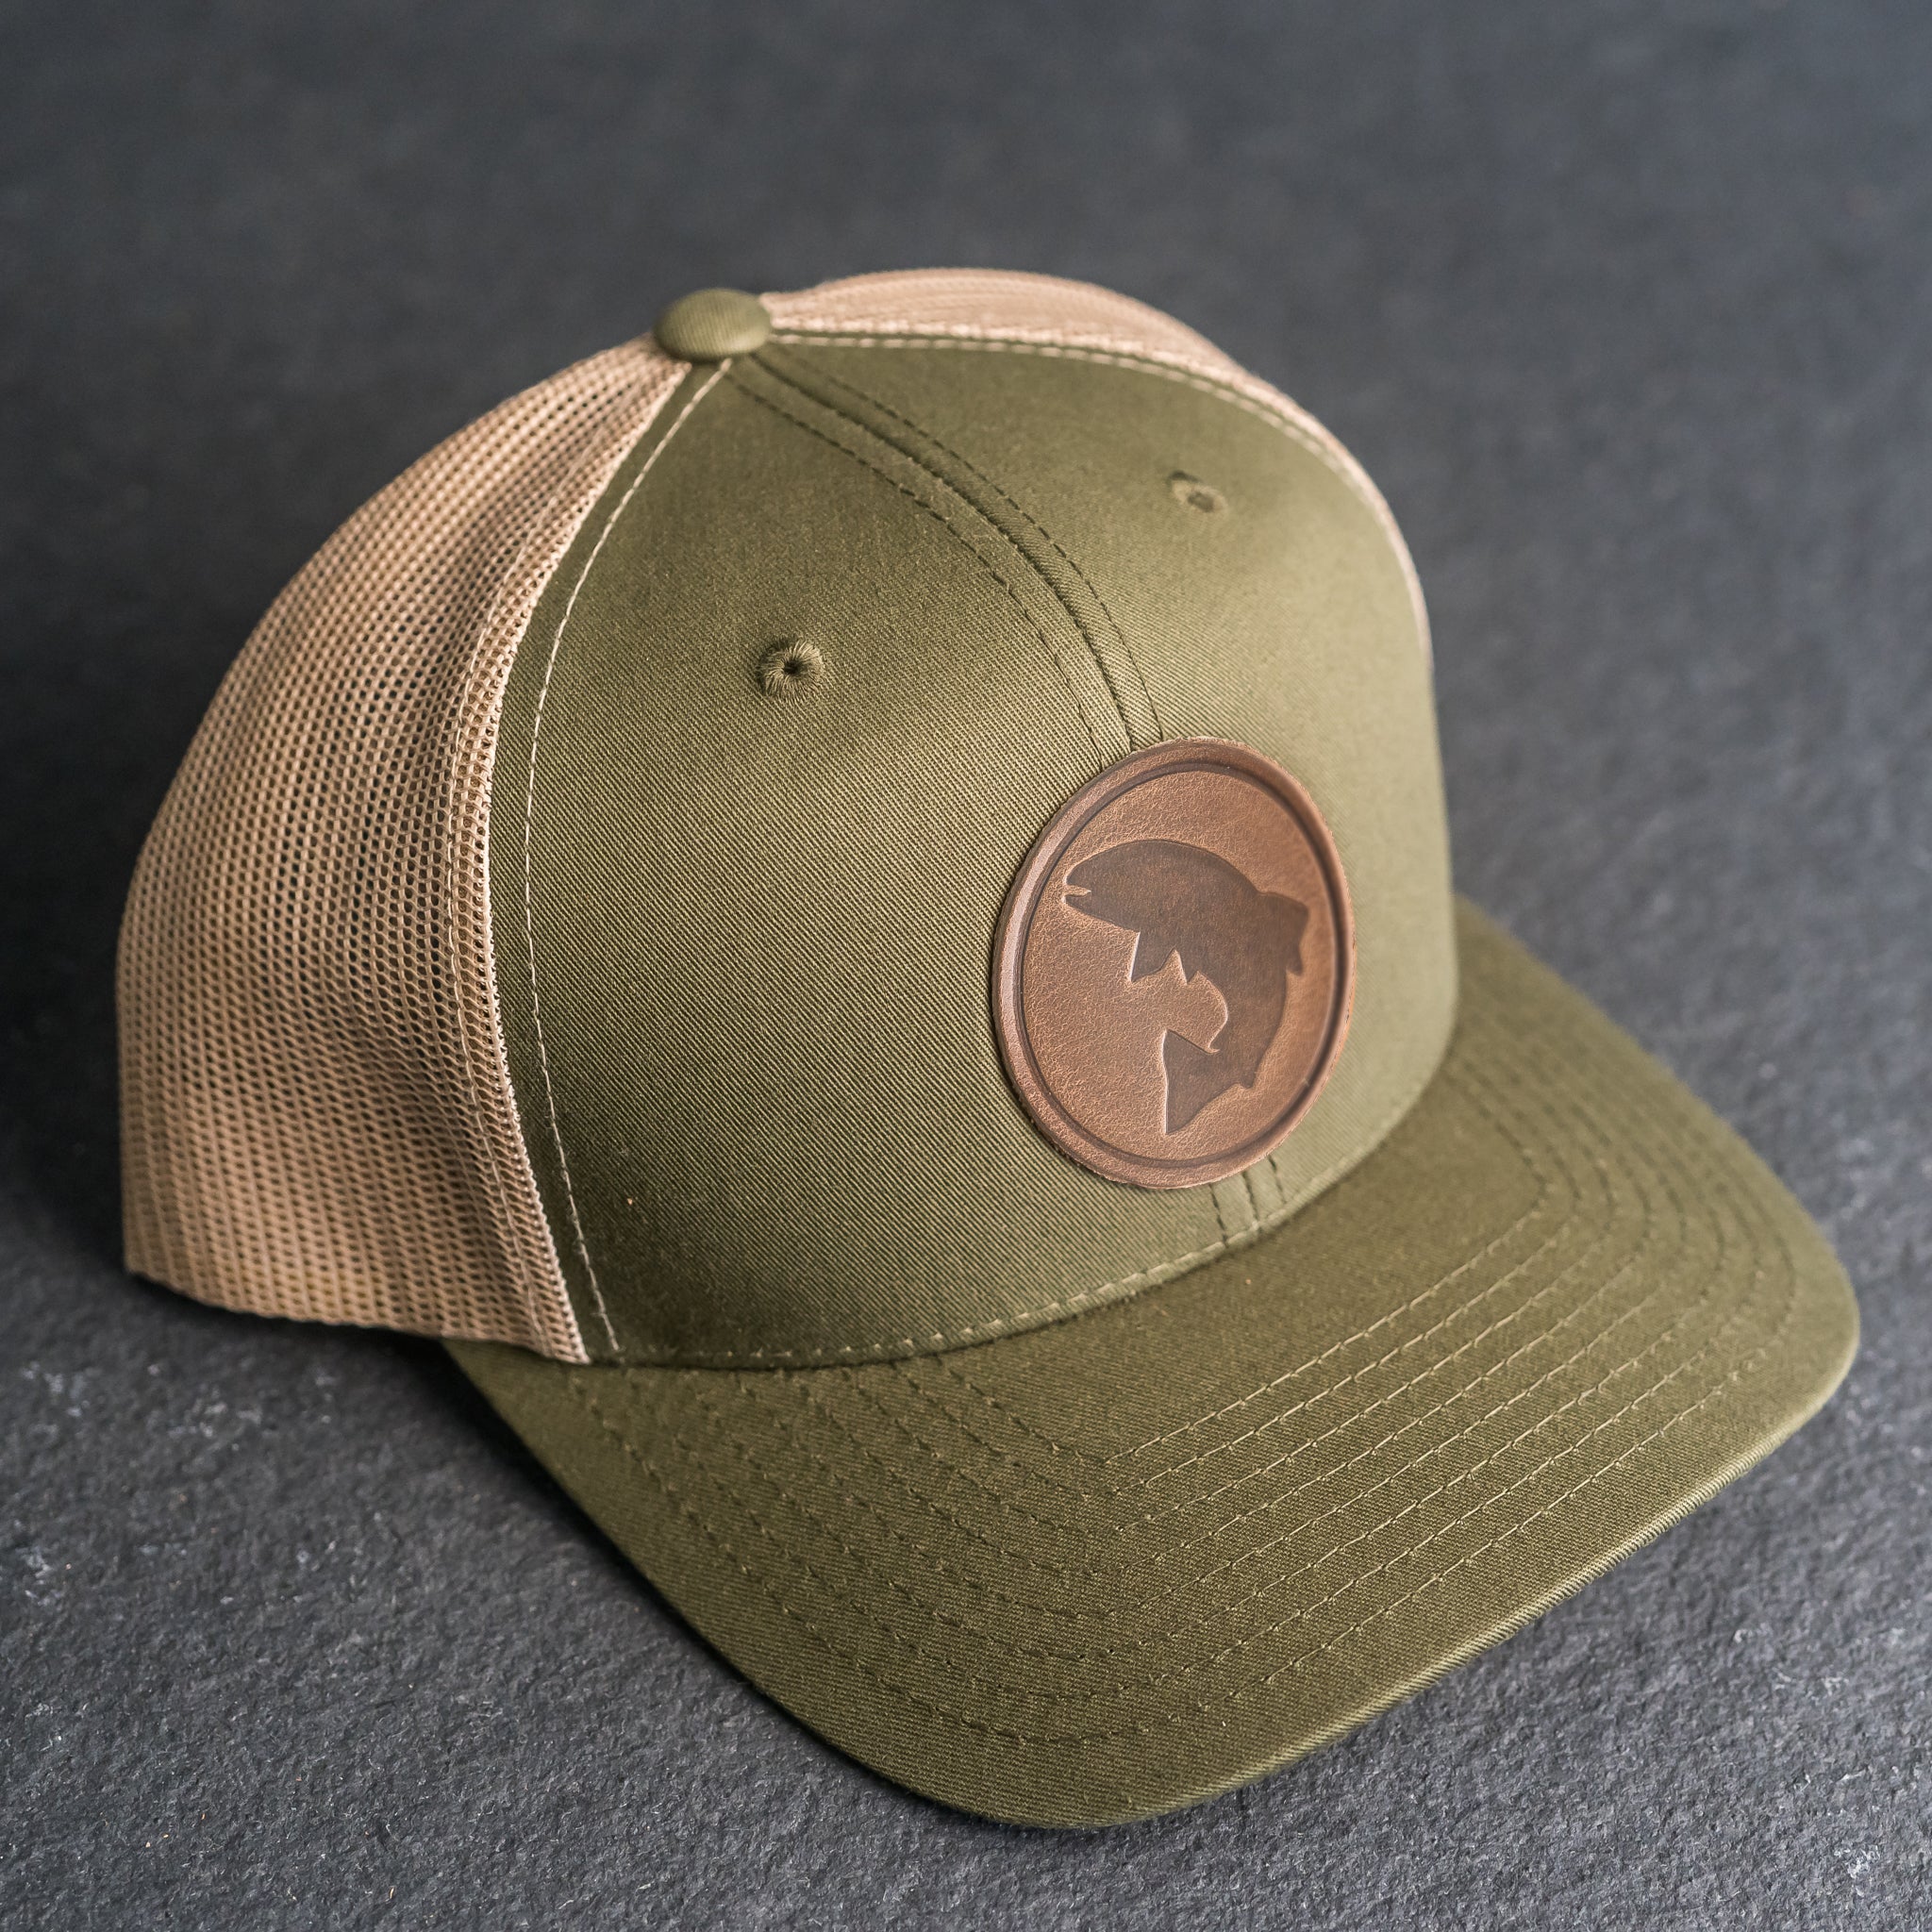 Leather Patch Trucker Style Hat - Circle Patch - Fish Stamp green/khaki / Cafe / Fish - Circle